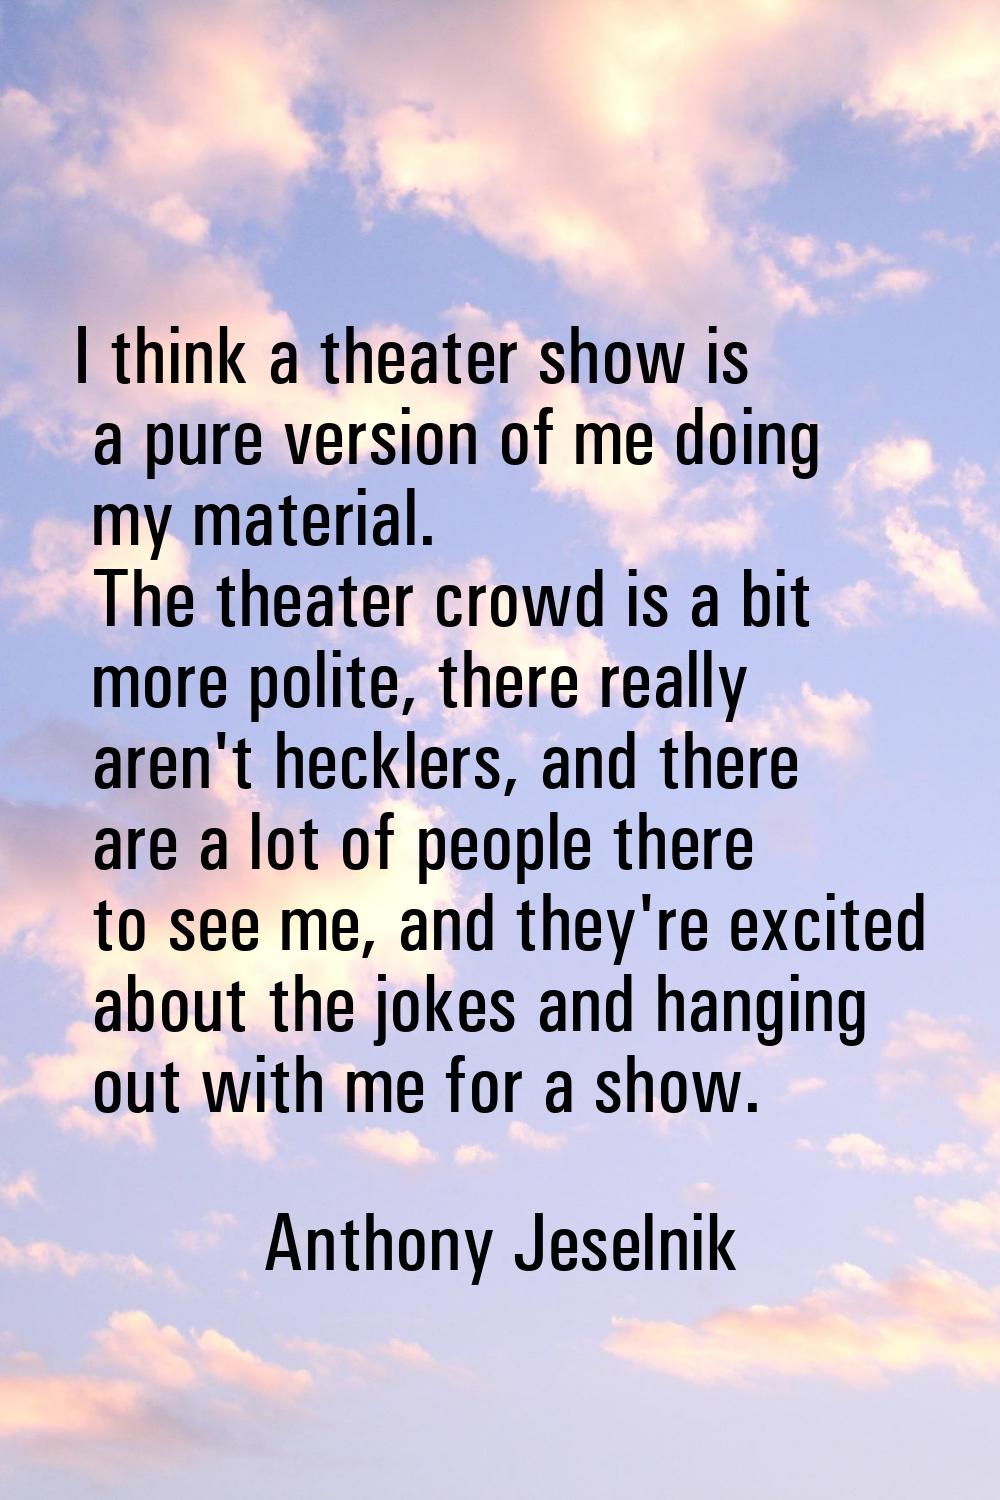 I think a theater show is a pure version of me doing my material. The theater crowd is a bit more p